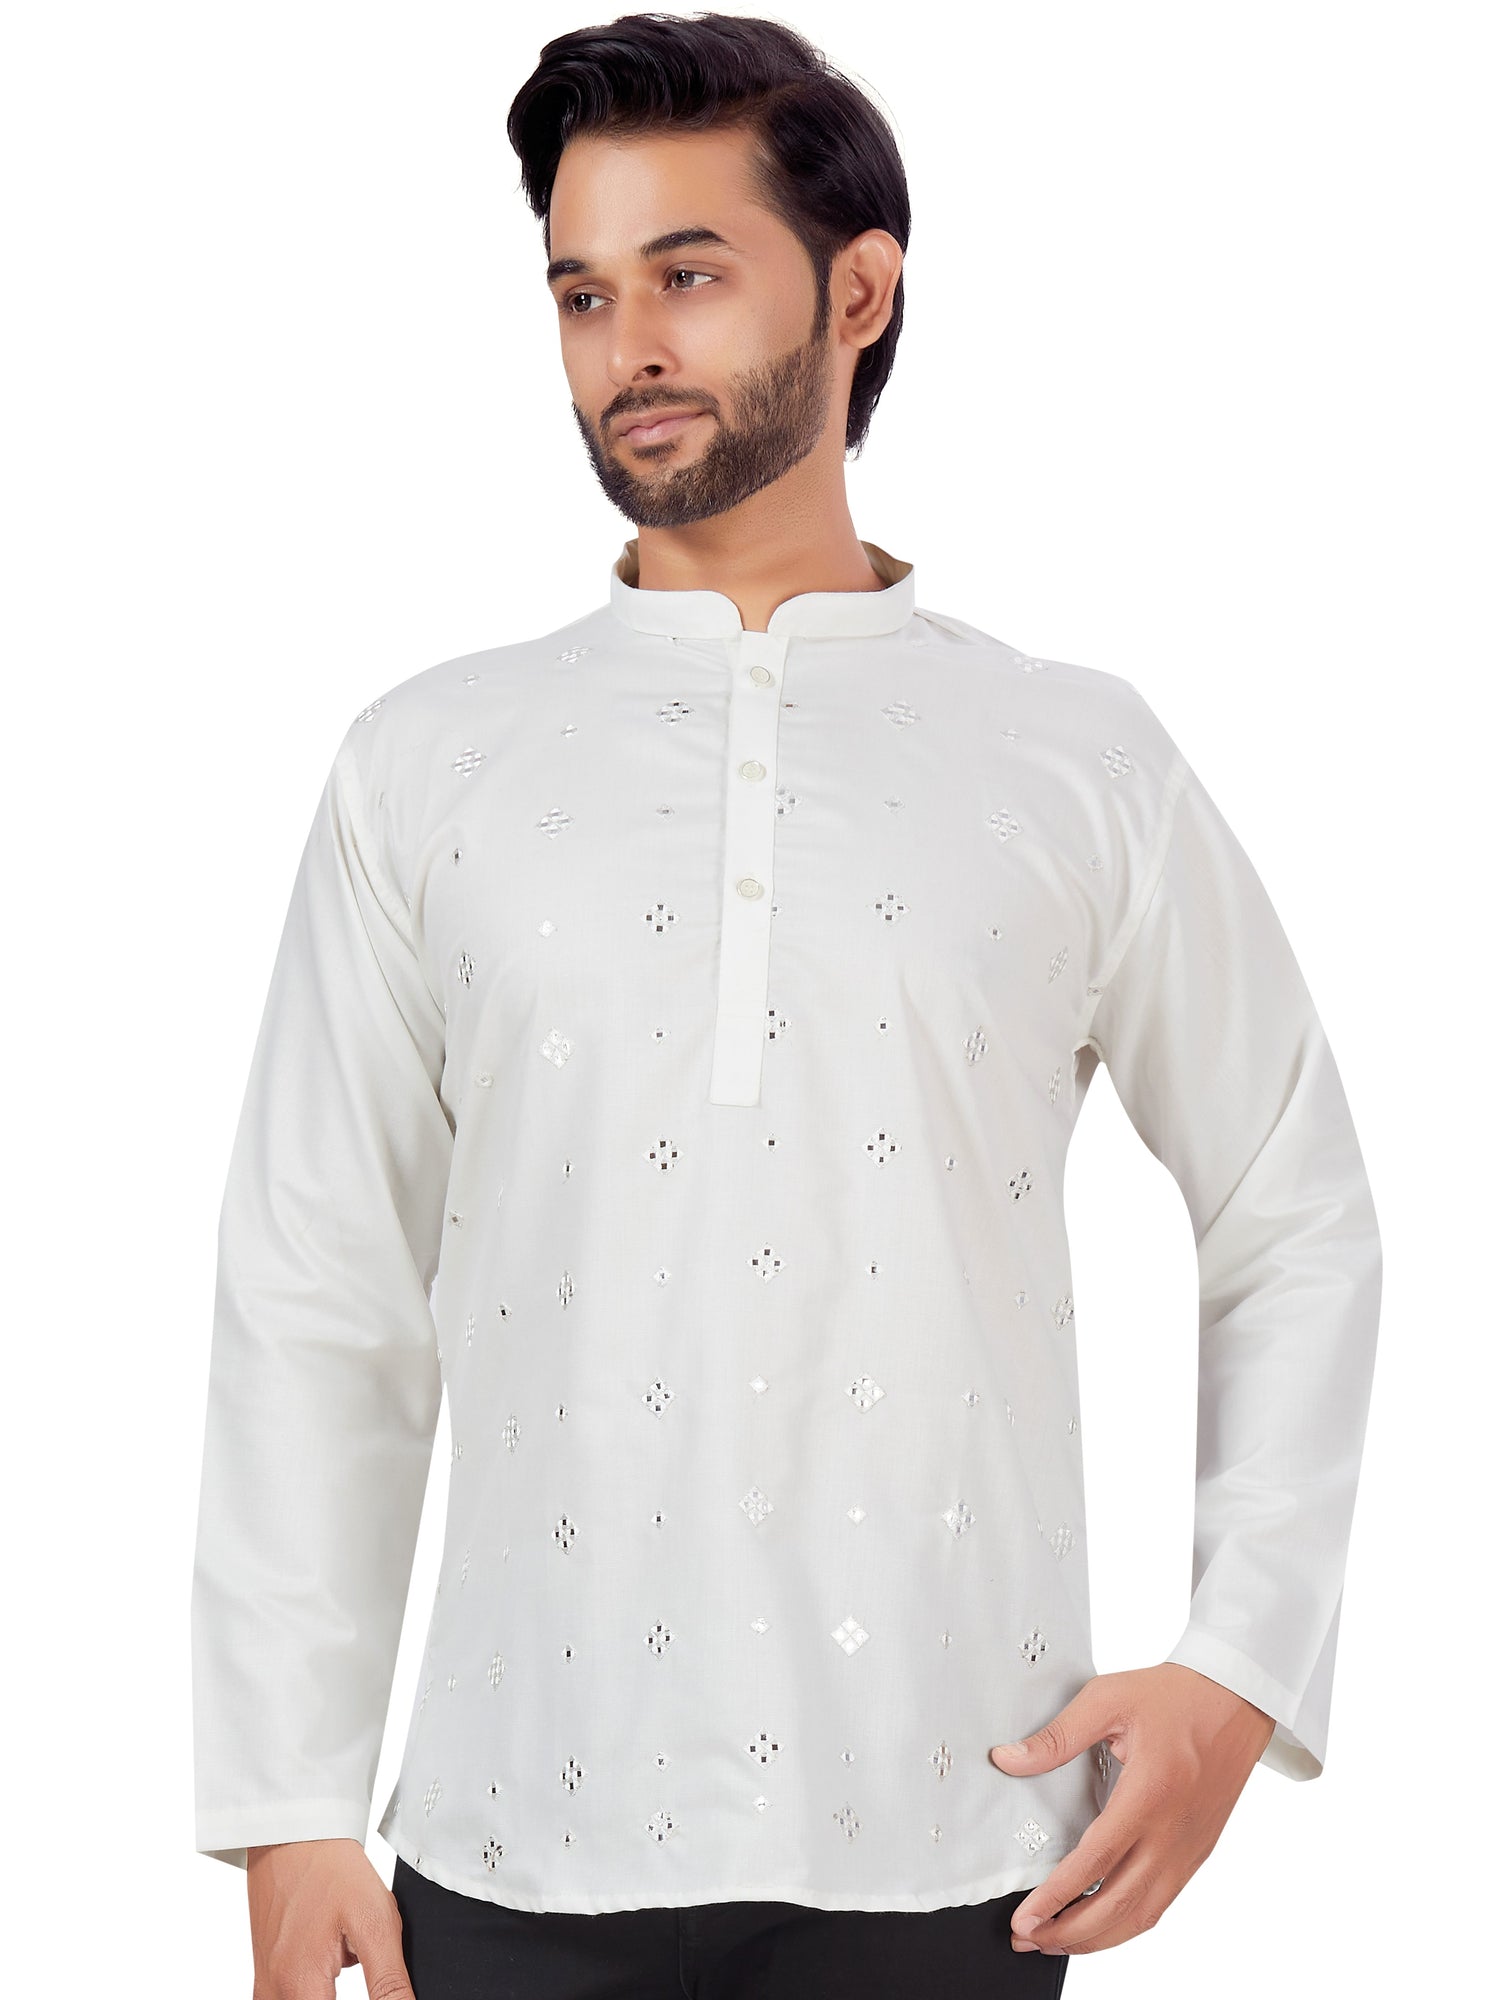 Mens Sequin Embroidered Kurti. - Roop Darshan